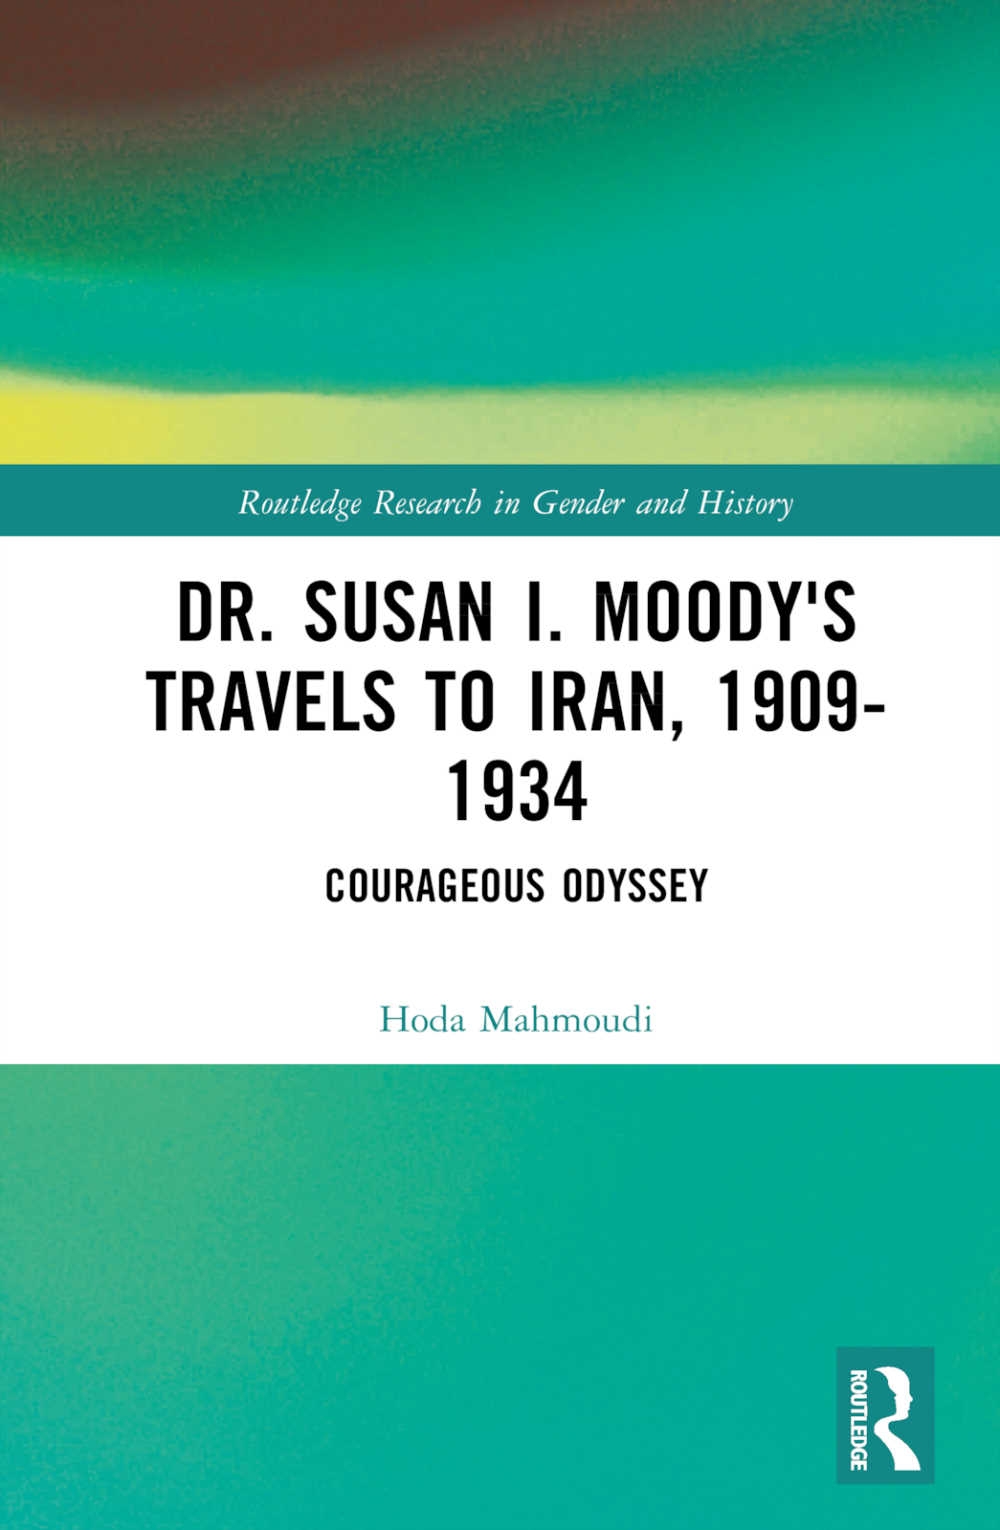 Dr. Susan I. Moody’s Travels to Iran, 1909-1934: Courageous Odyssey